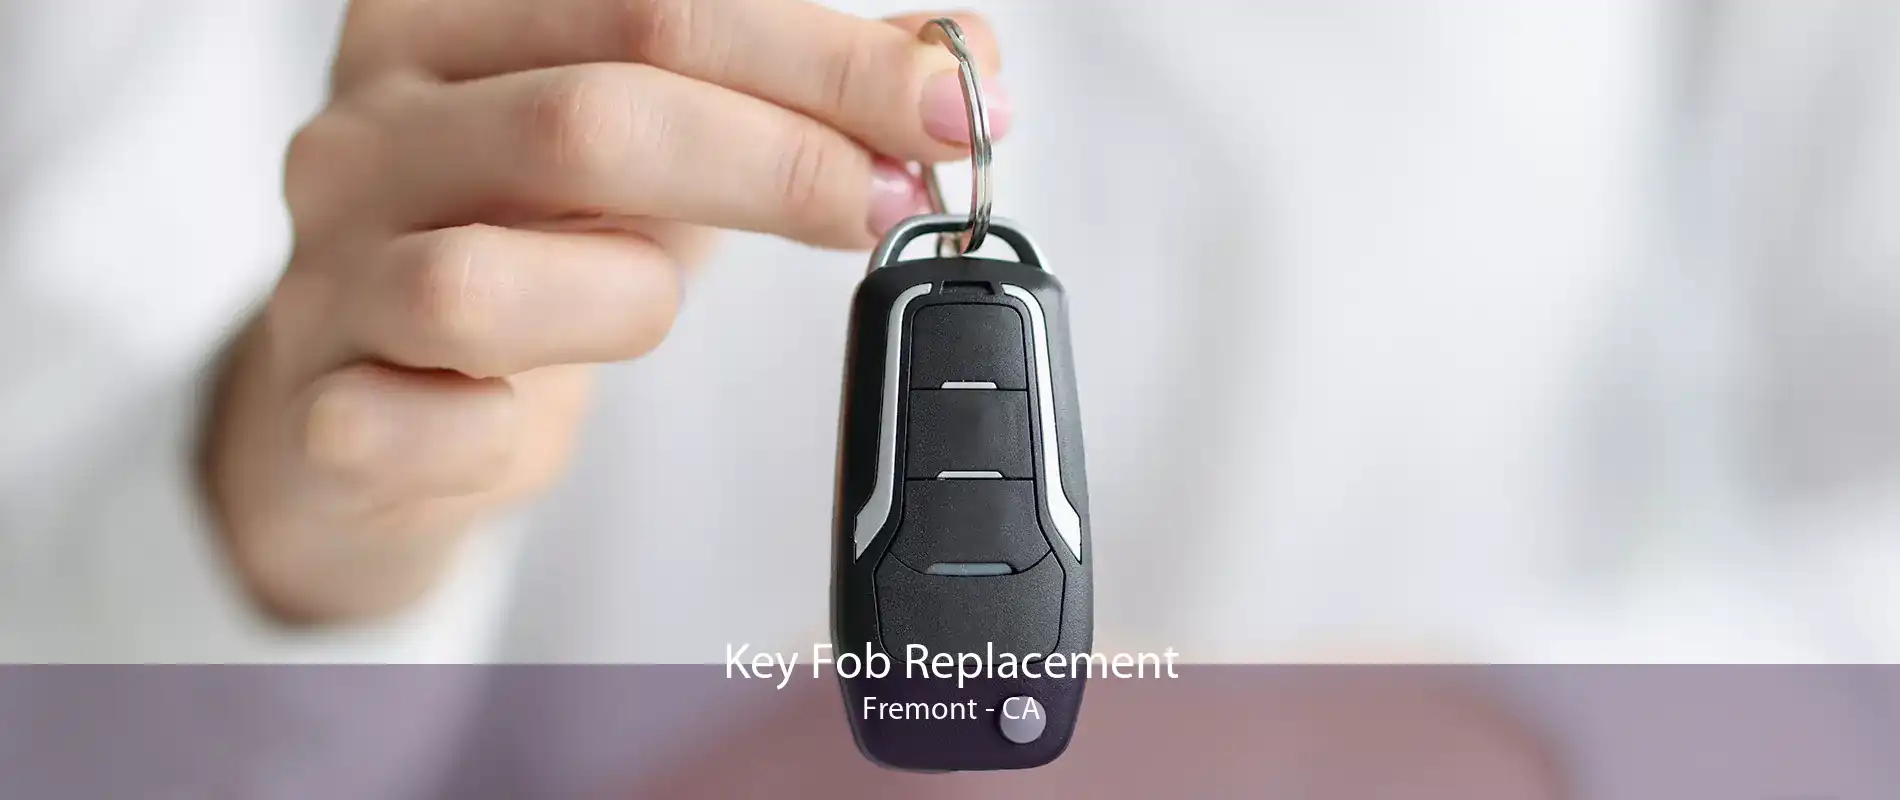 Key Fob Replacement Fremont - CA